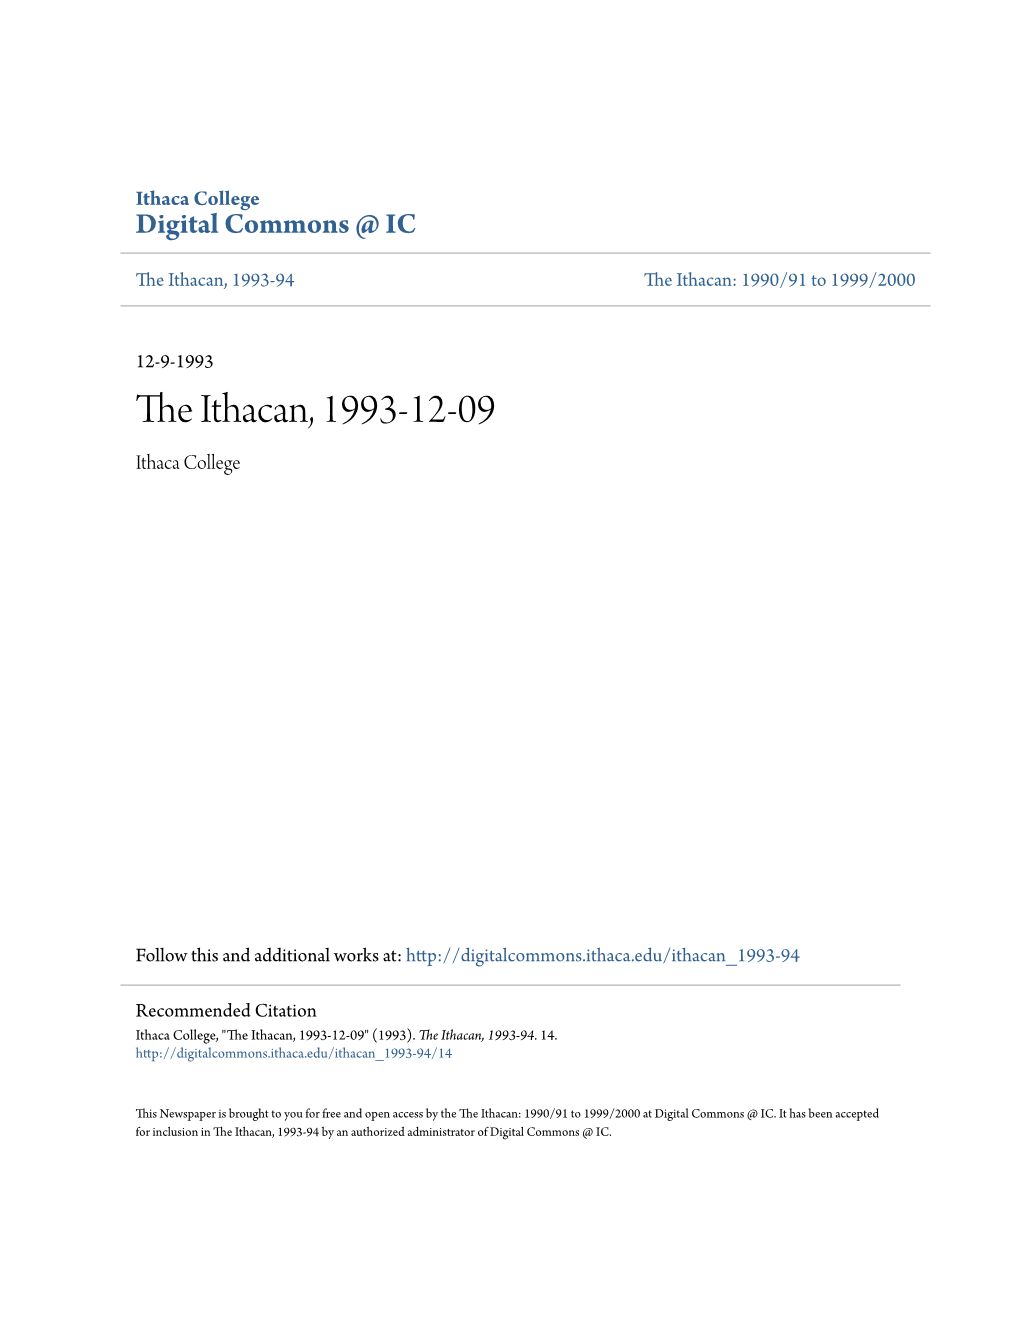 The Ithacan, 1993-12-09